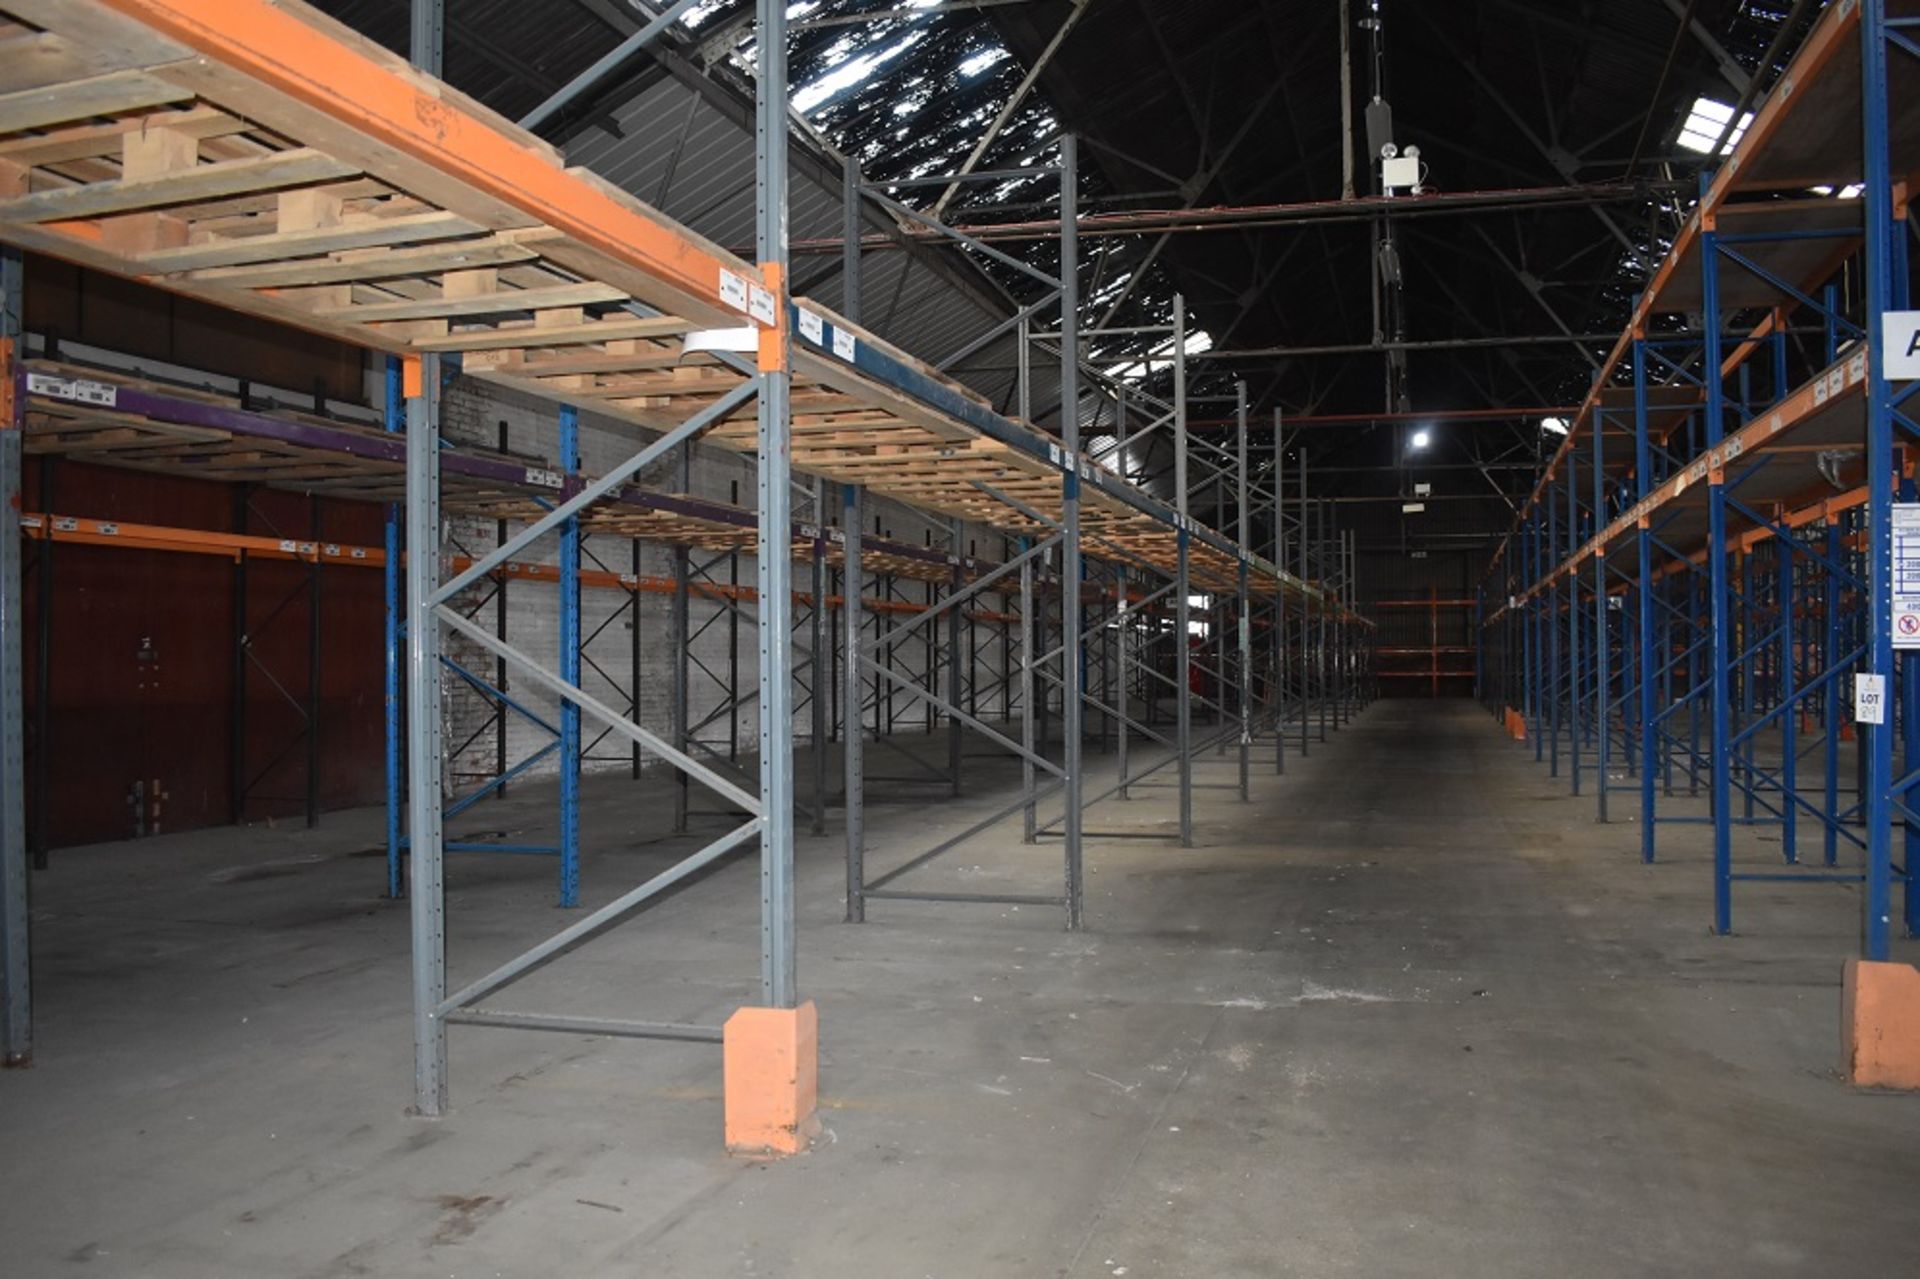 14 X BAYS OF 3 MTR HIGH BOLTLESS PALLET RACKING CONSISTING OF 28 BEAMS 15 X FRAMES - Image 2 of 2